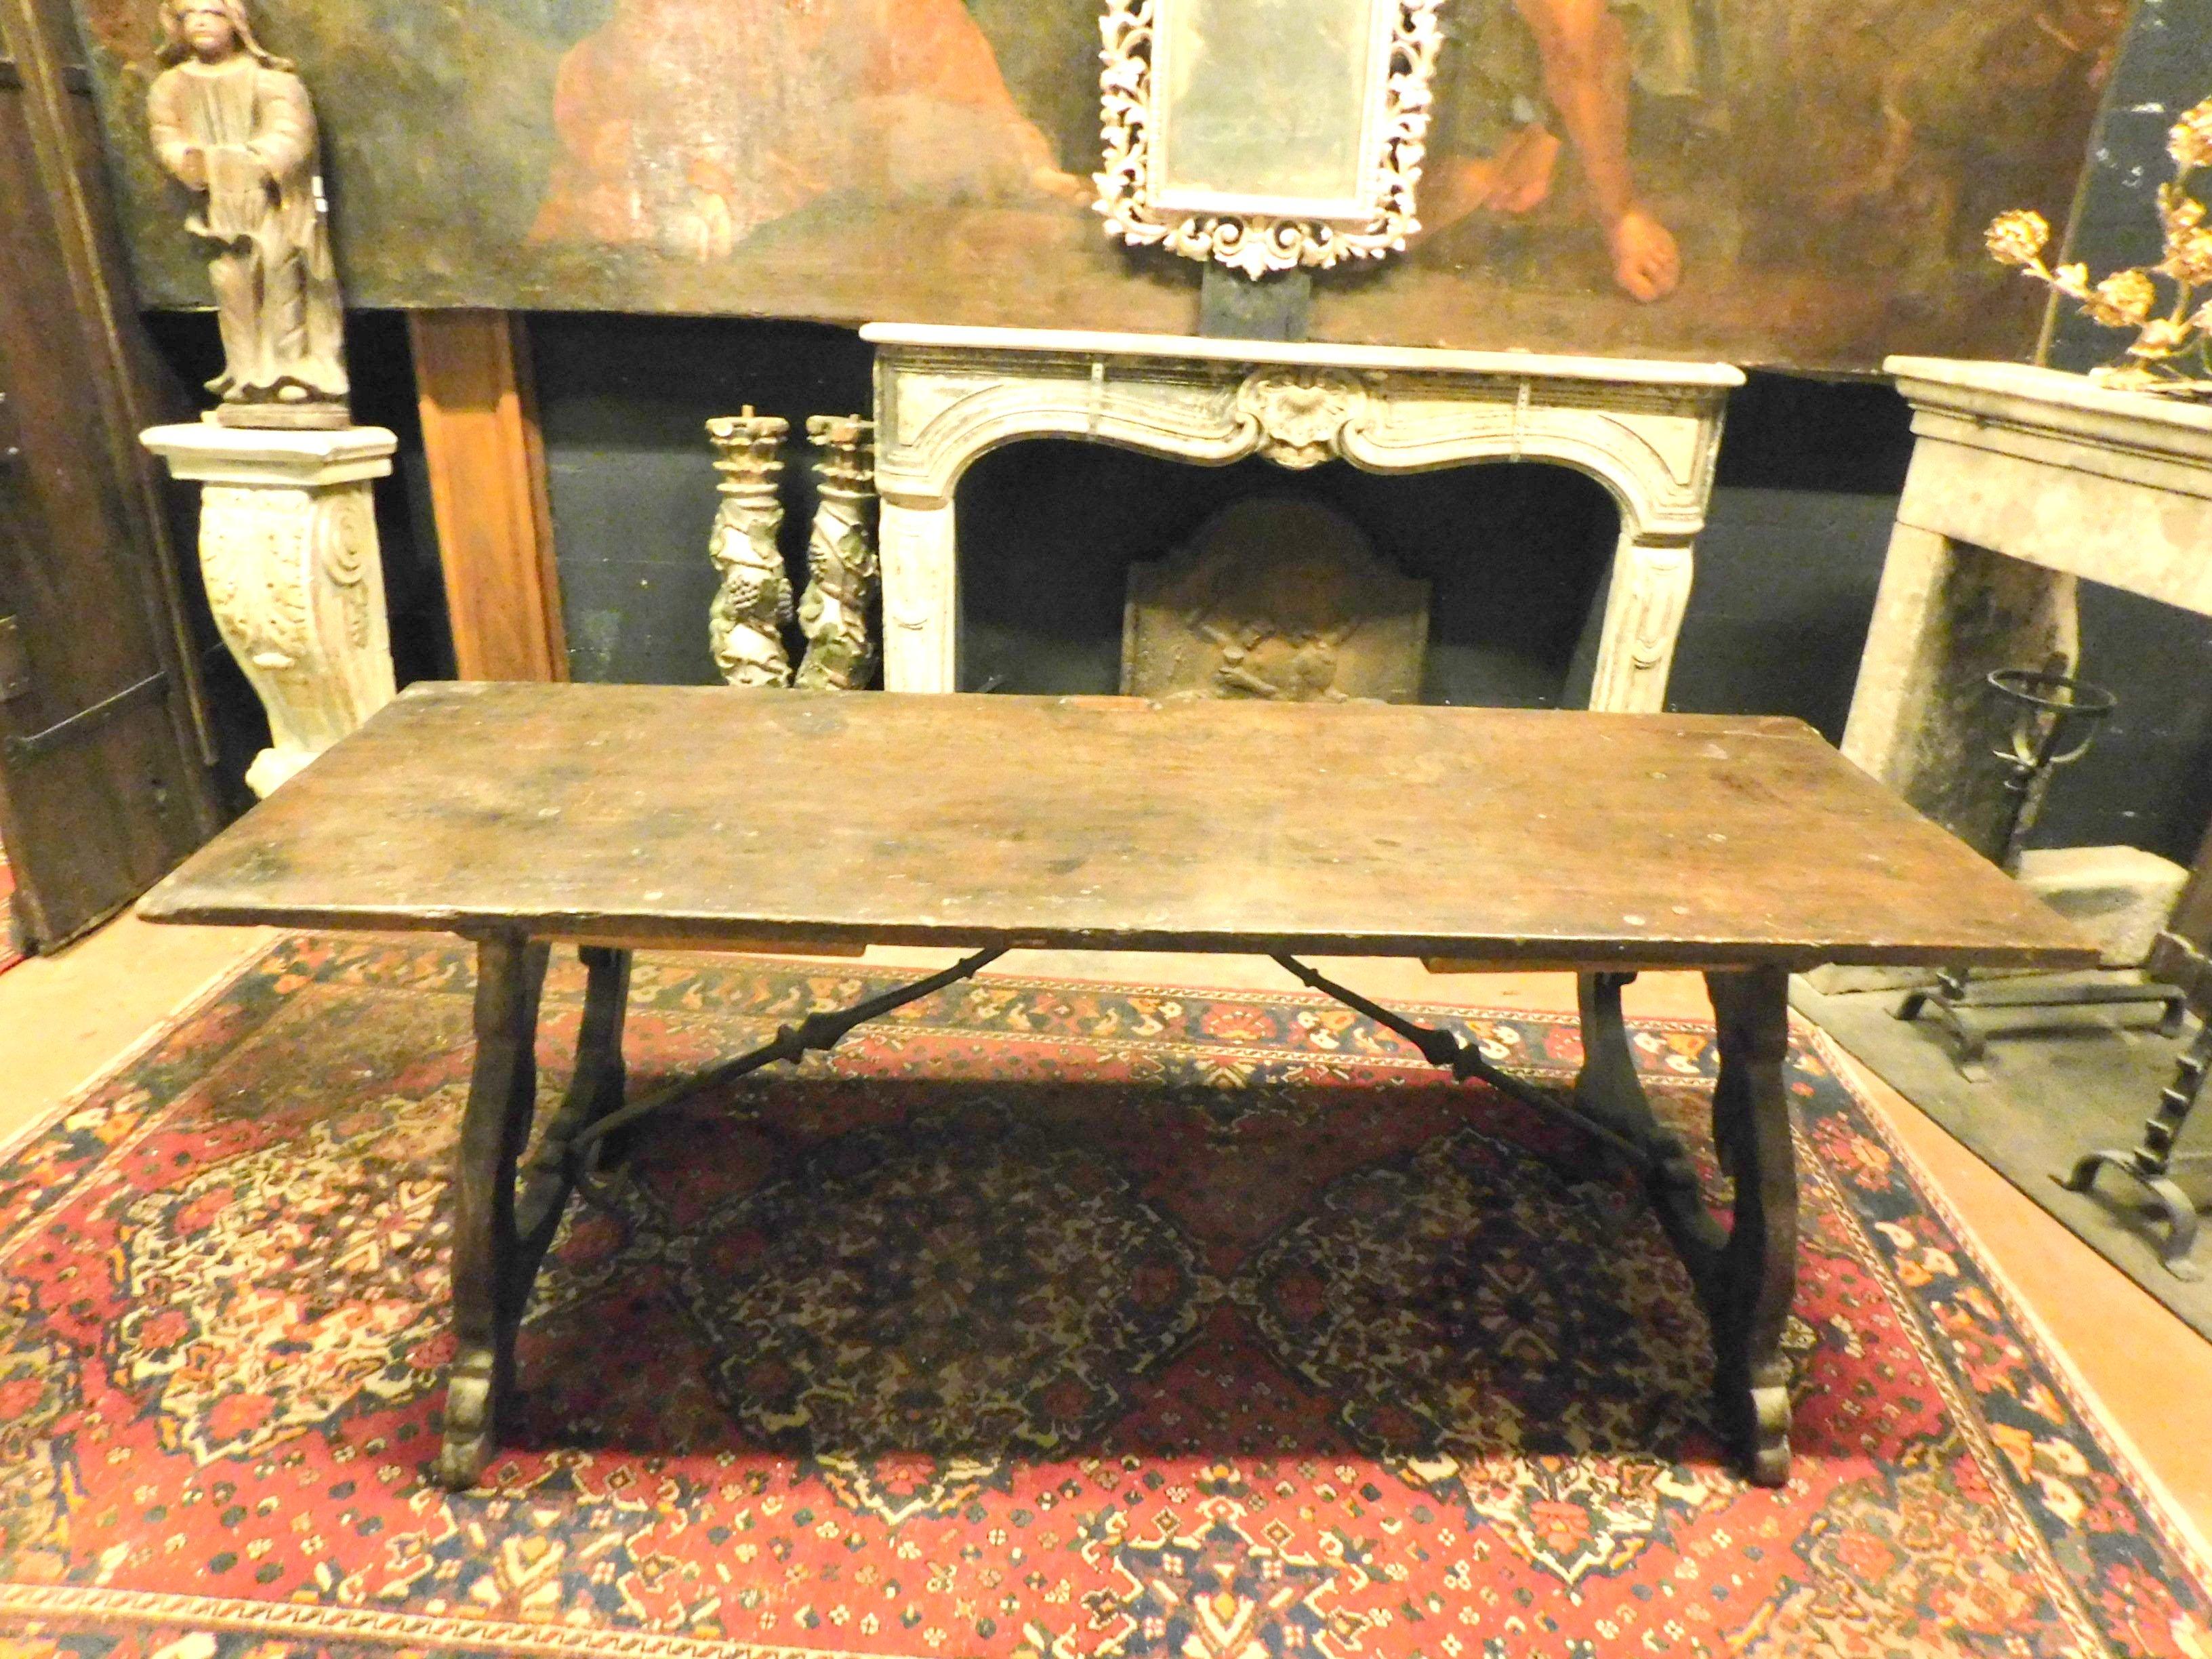 Hand-Carved Antique Refectory Table in Walnut and Oak, Single Plank, 18th Century Spain